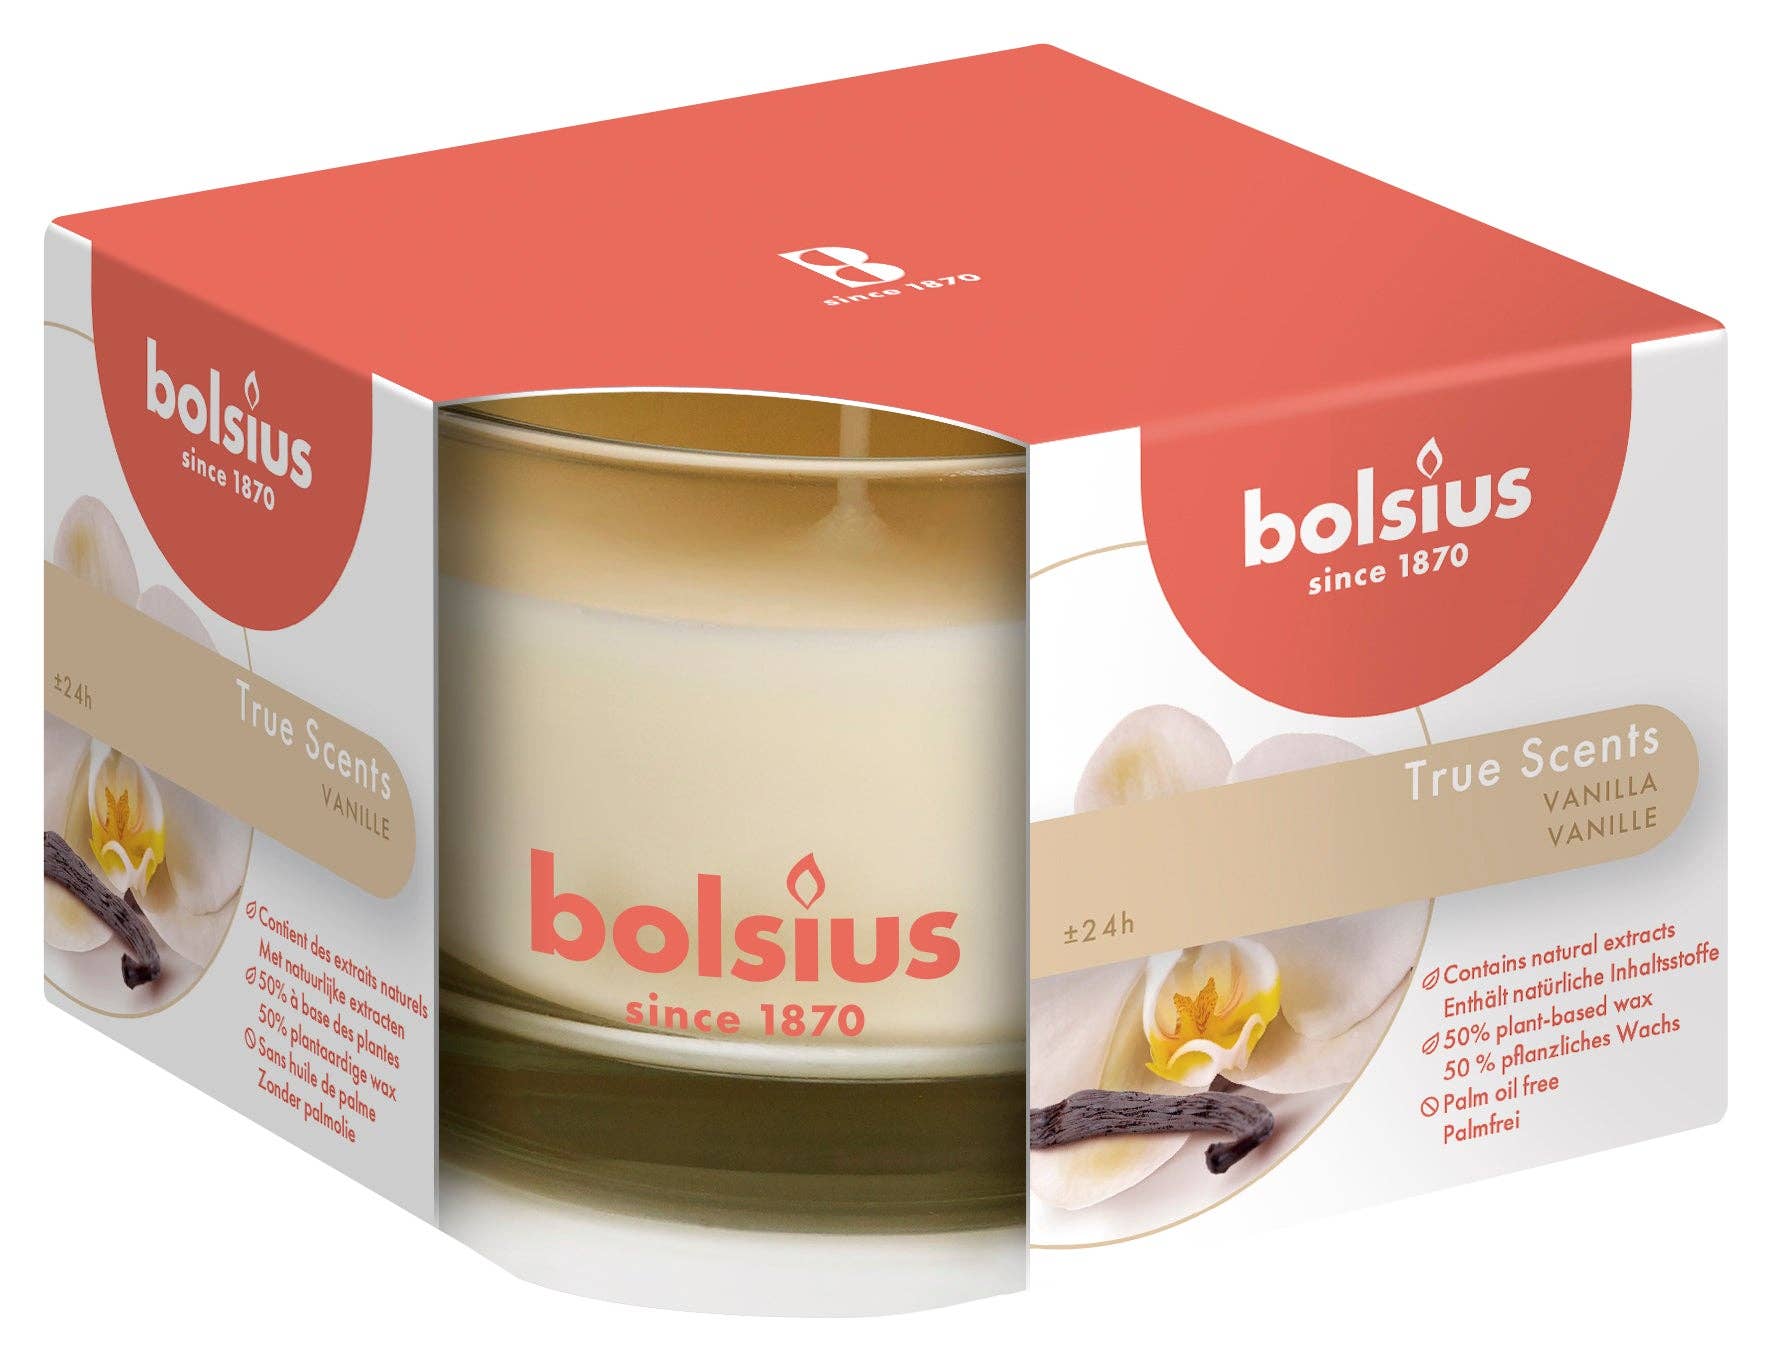 Candles: Vanilla Scented Candle - 3.5 x 2.5 Inches - 24 Hours Burn Time - Premium European Quality - 6 Fragranced Candles In Glass - **Sold Individually